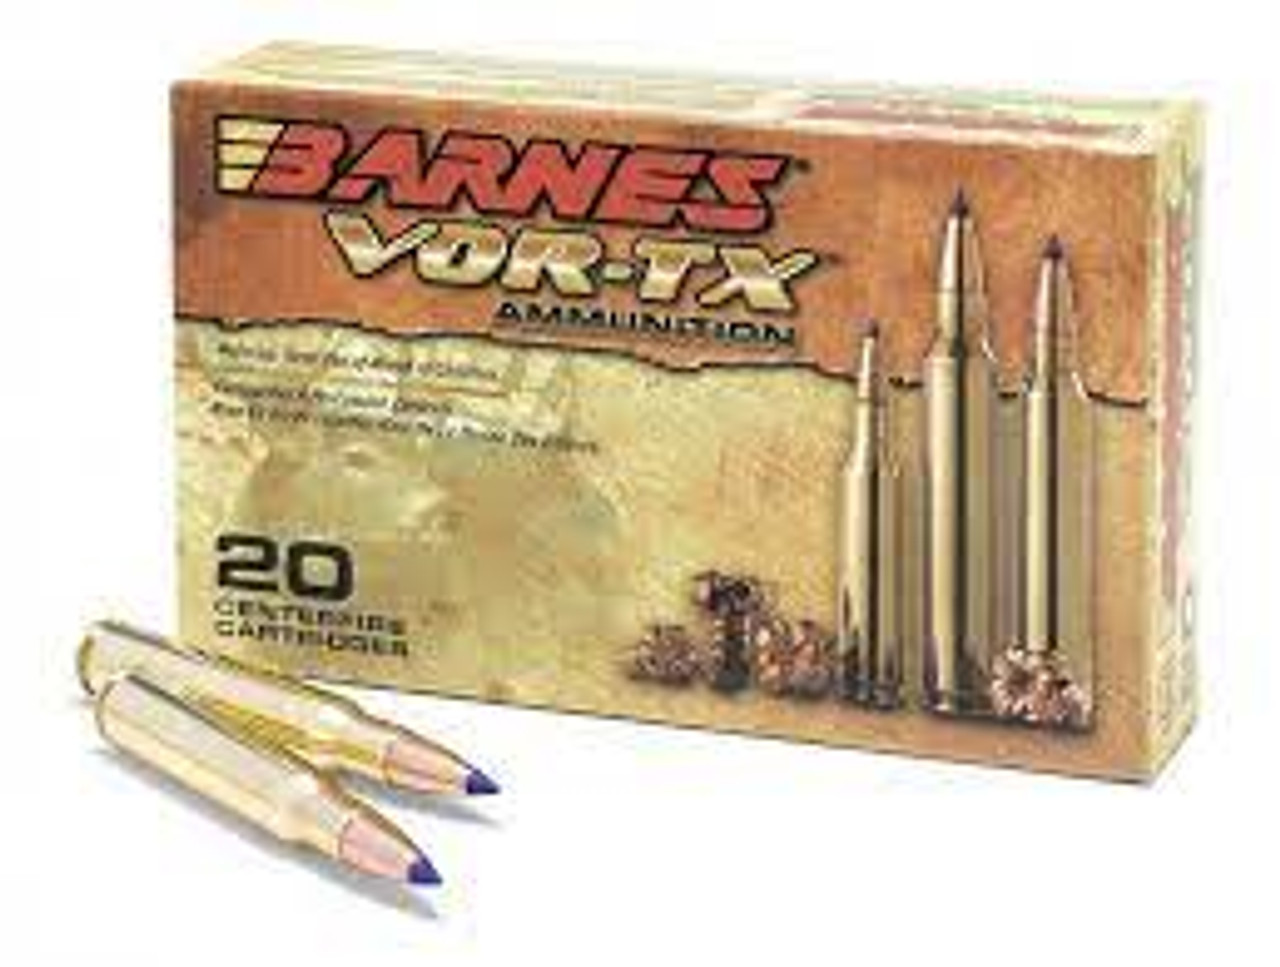 Barnes Vor-TX Ammunition 260 Rem, 120 Gr TTSX BT, 2950 FPS – 20 Cartridges

Barnes VOR-TX is precision ammunition loaded with the deadliest bullets on the planet. Barnes, the leader in bullet innovation offers hunters the ultimate in accuracy, terminal performance and handloaded precision in a factory loaded round.

Offering double-diameter expansion, maximum weight retention and excellent accuracy, the TSX, Tipped TSX, and TSX FN provide maximum tissue and bone destruction, pass-through penetration and devastating energy transfer.

Multiple grooves in the bullet’s shank reduce pressure and improve accuracy. Barnes all-copper bullets open instantly on contact – no other bullet expands as quickly. Nose peels back into four sharp-edged copper petals destroying tissue, bone and vital organs for a quick, humane kill.

Specifications

Cartridge: 260 Remington
Type: TTSX BT
Weight: 120
BC: .412
Velocity: 2950
Item Number: 22010